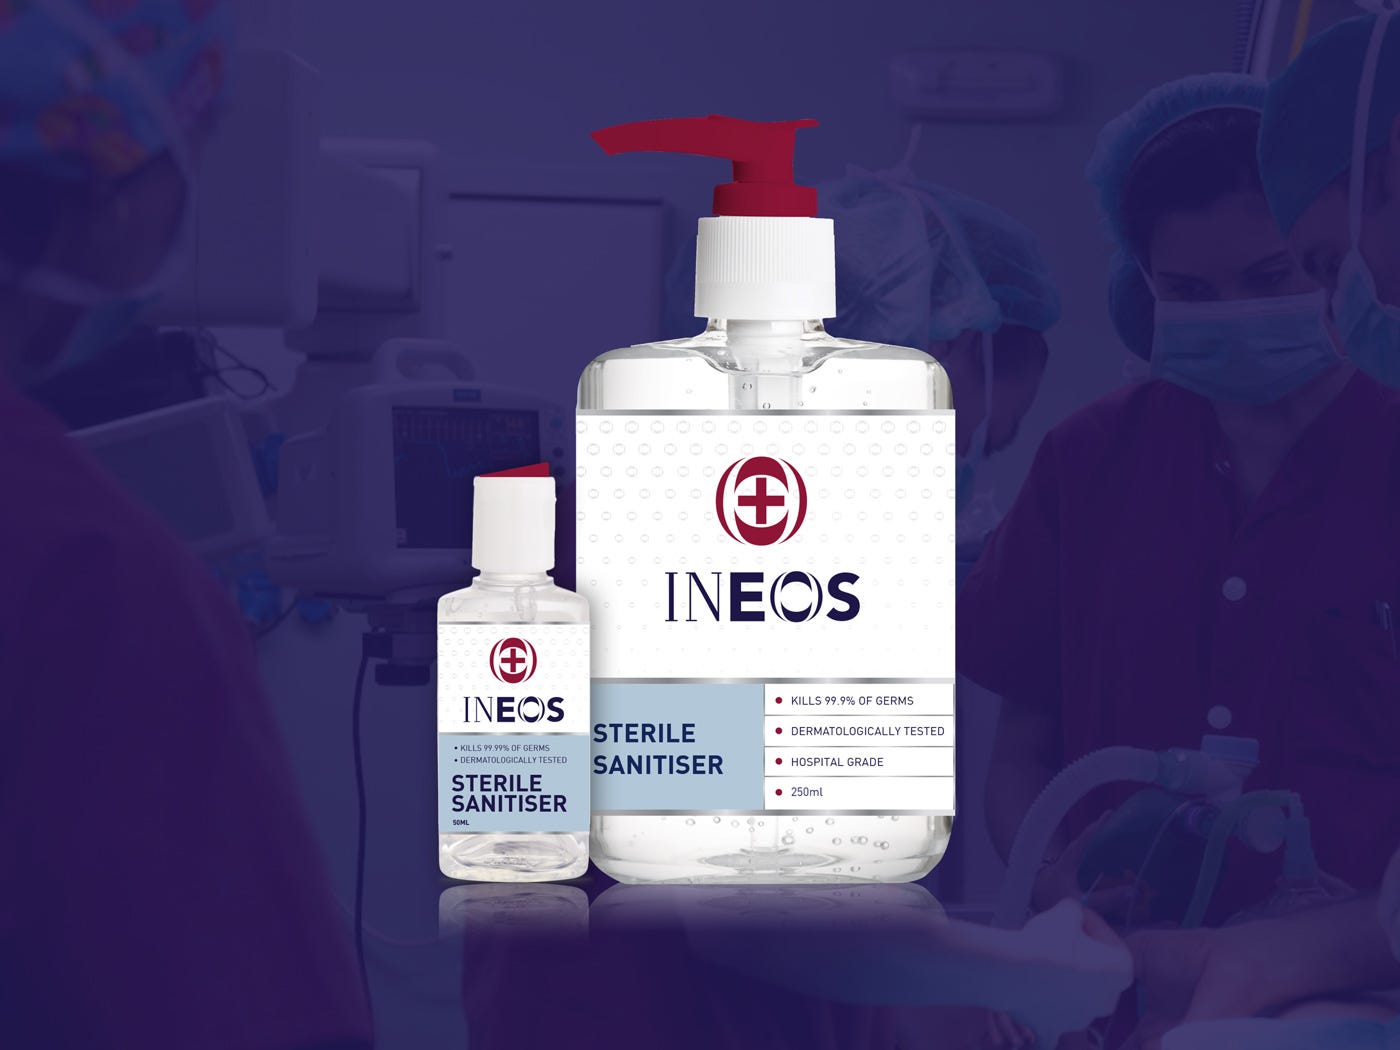 a photo of ineos hygienics sanitiser bottles on a blue background